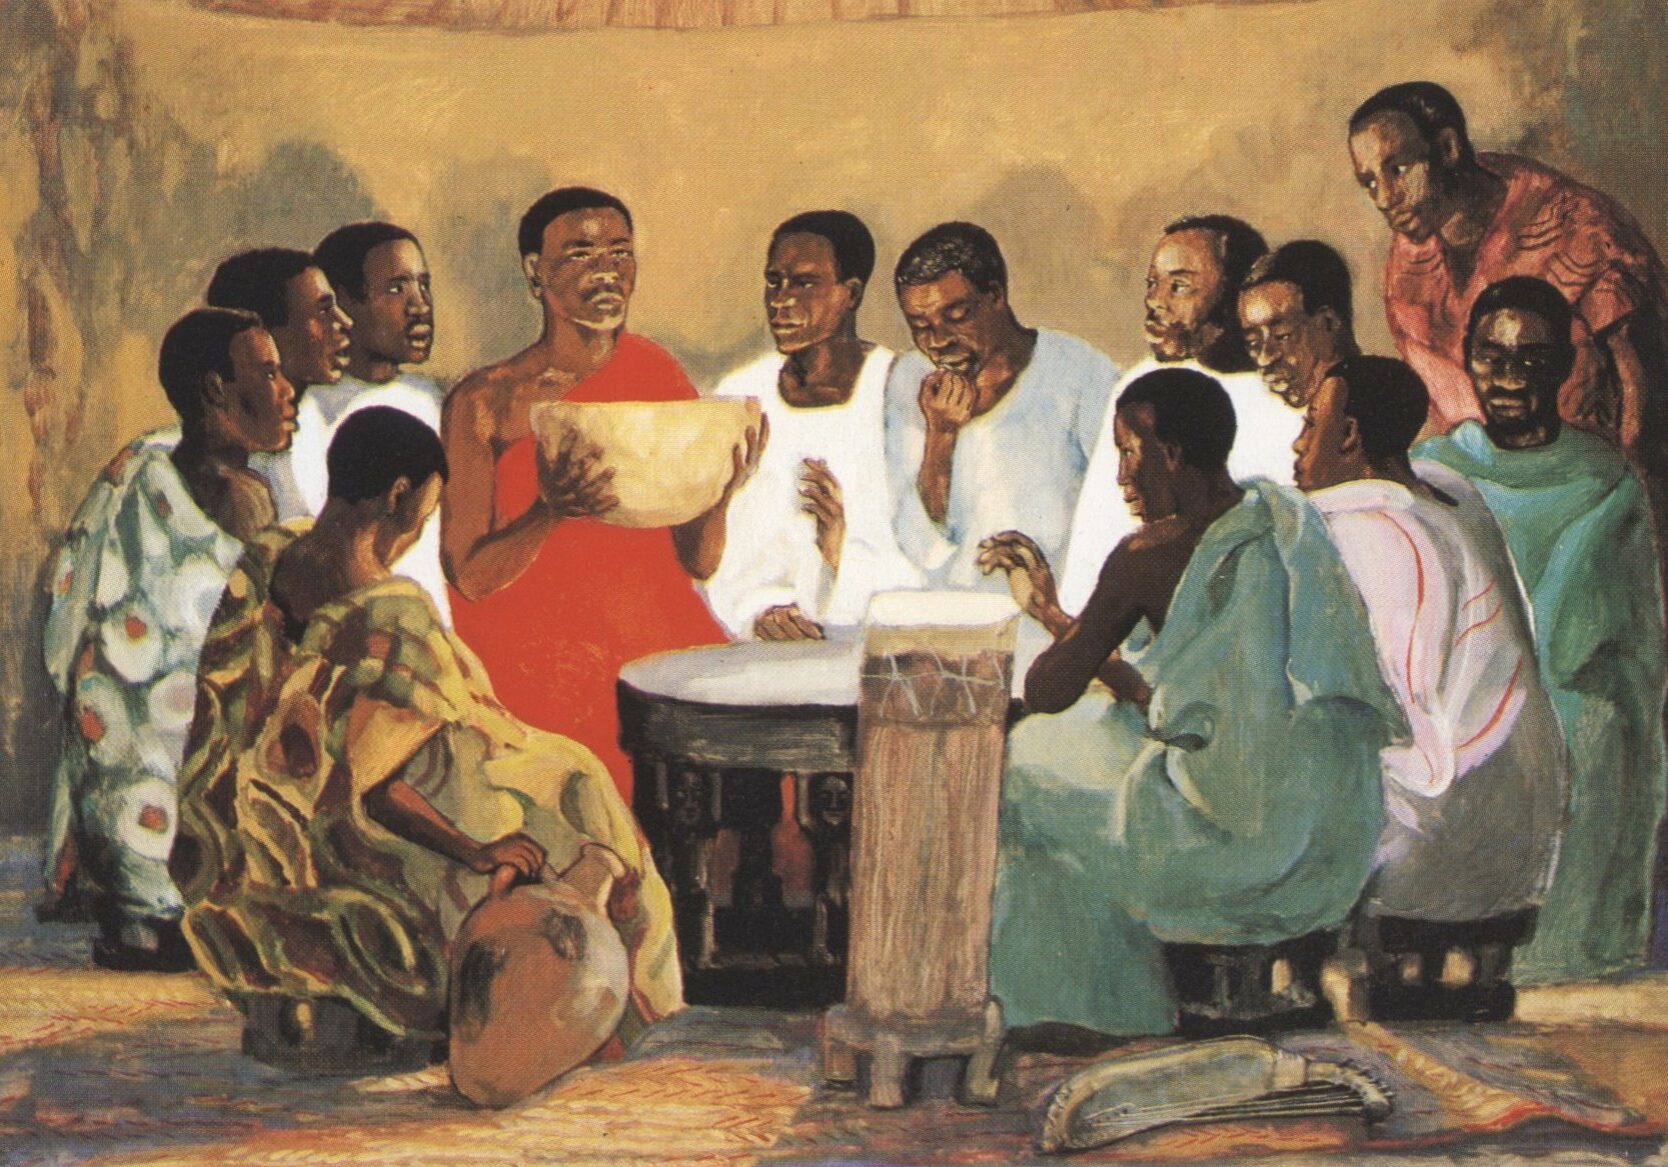 A painting of people gathered around a table.